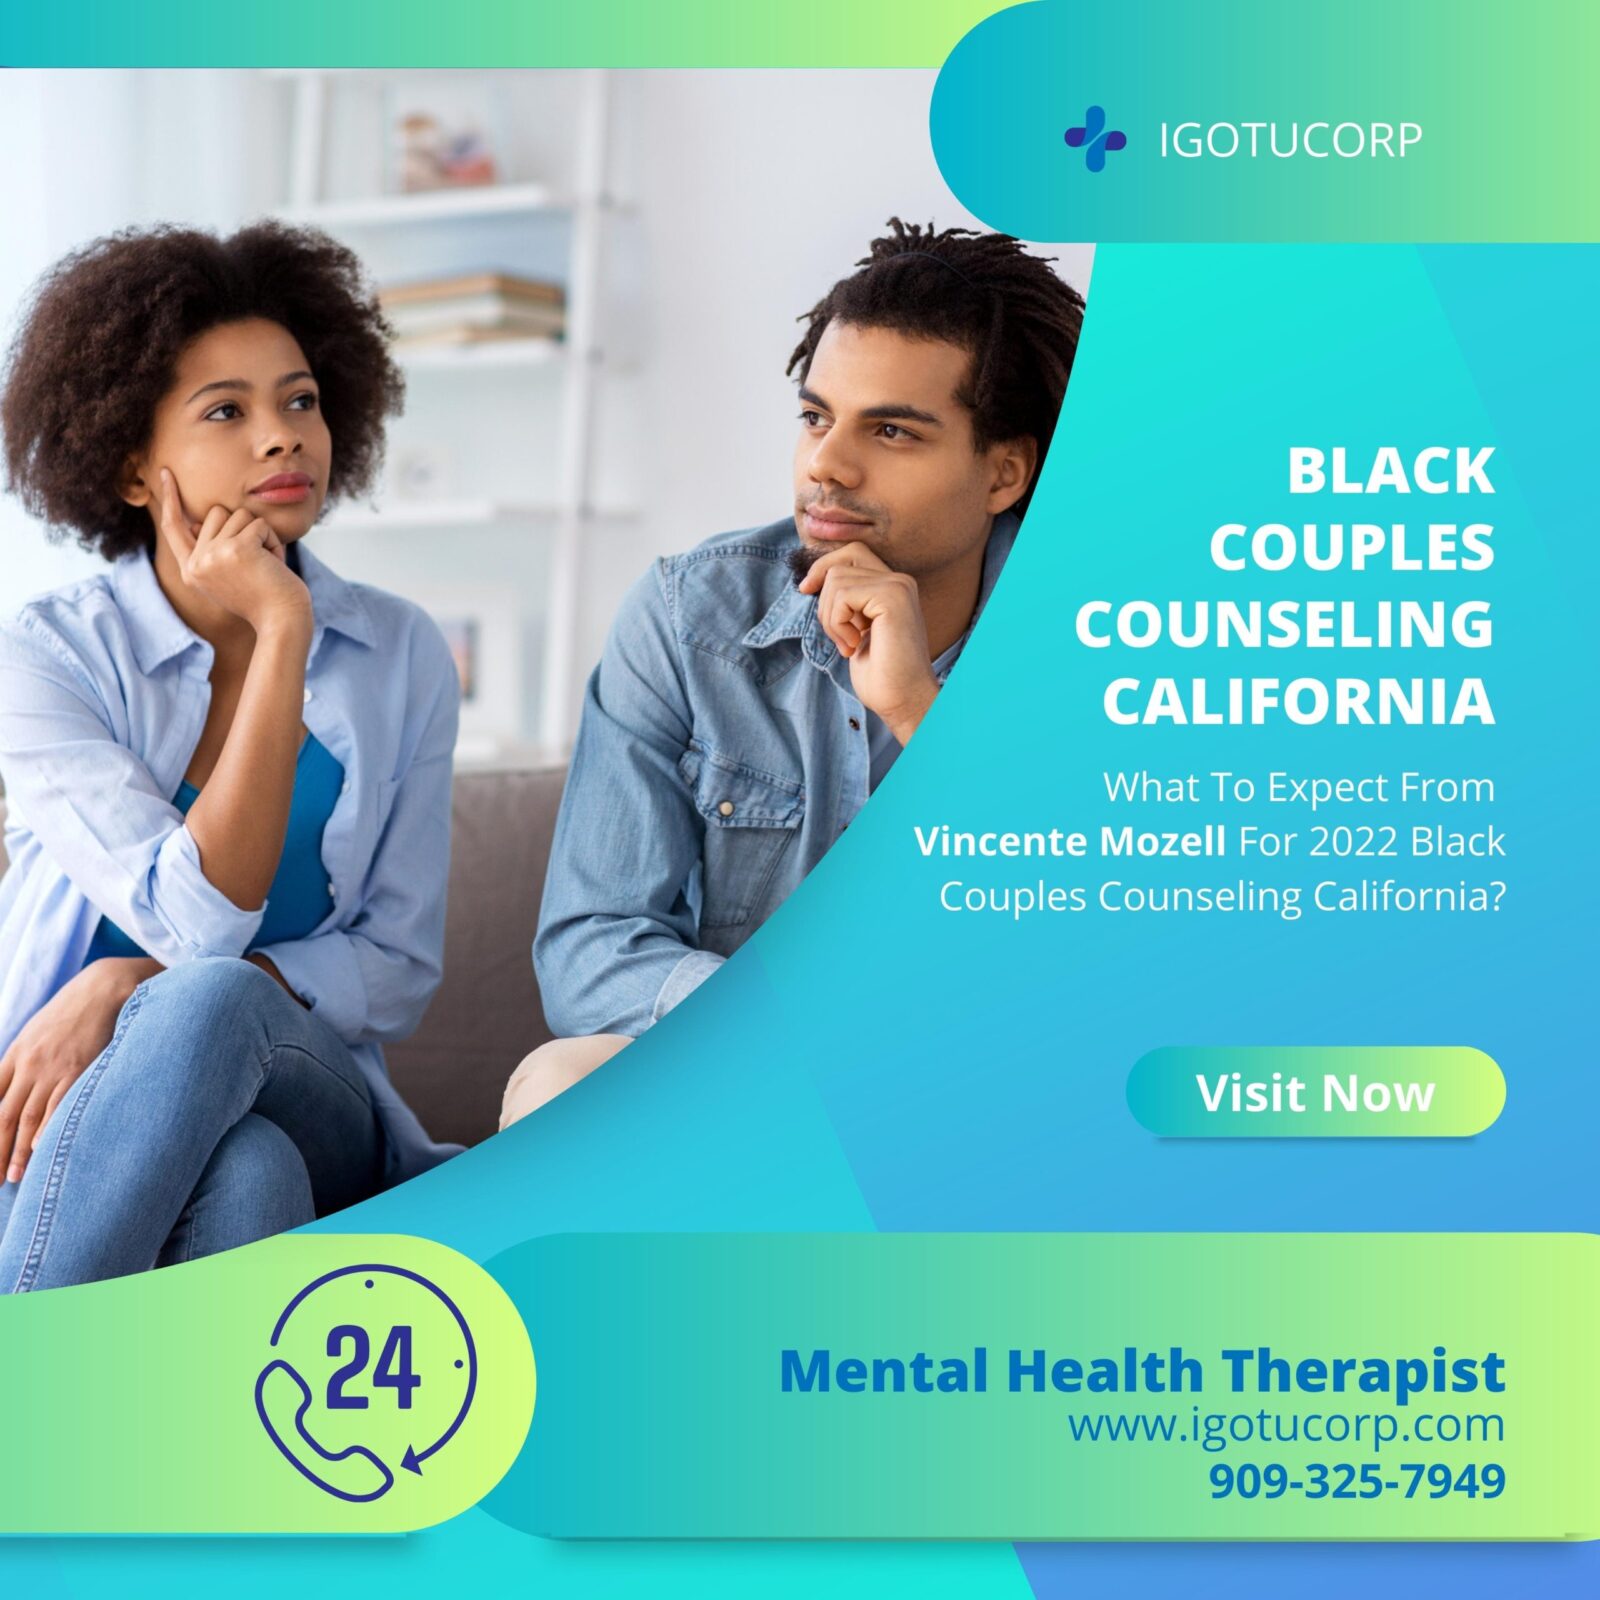 Black Couples Counseling California